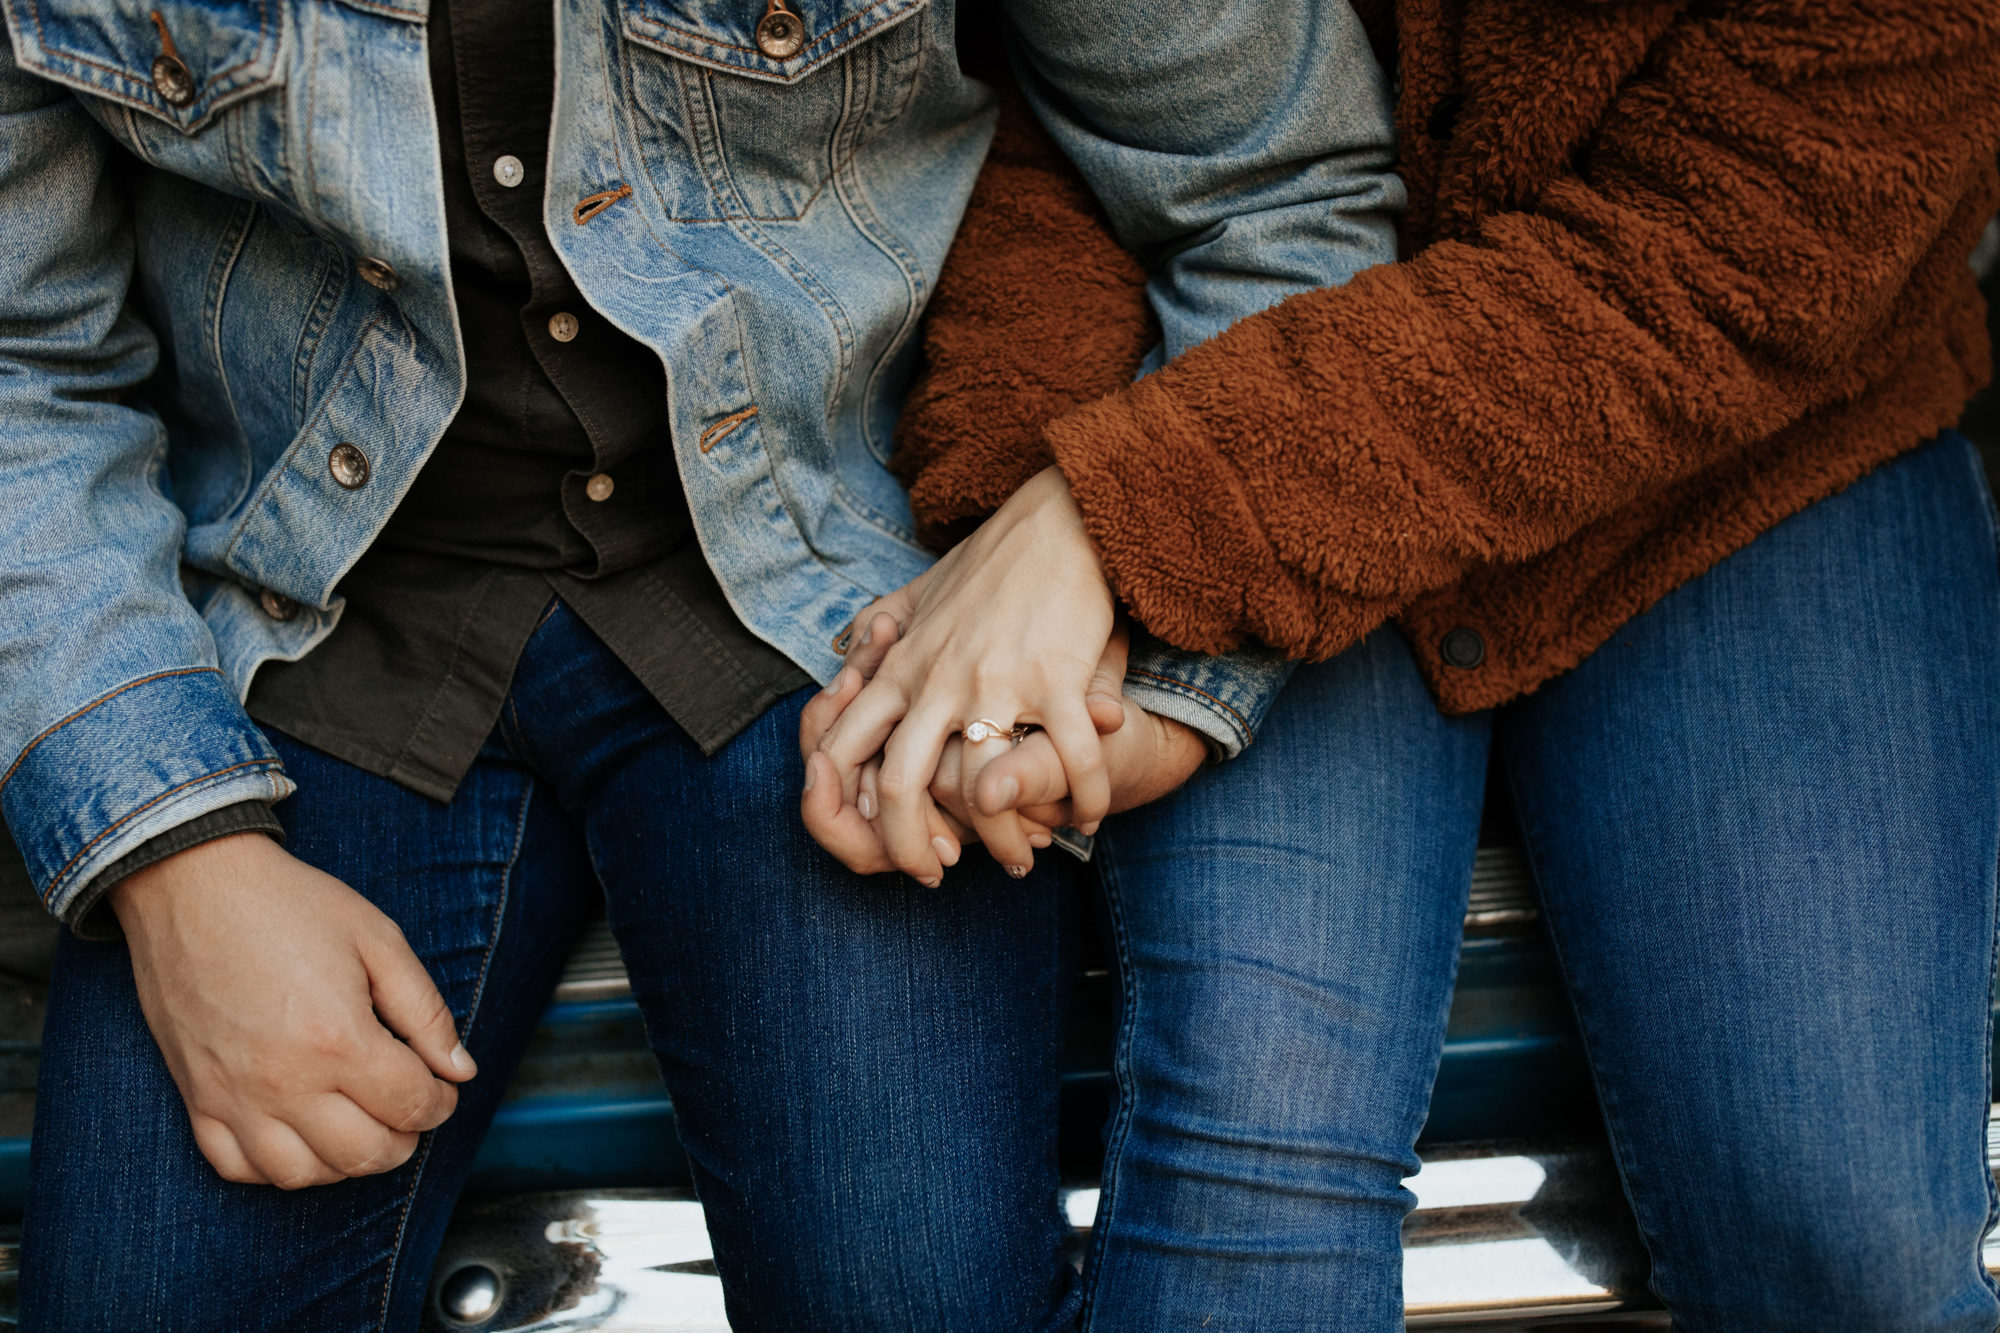 Engagement ring photo while couples holding hands